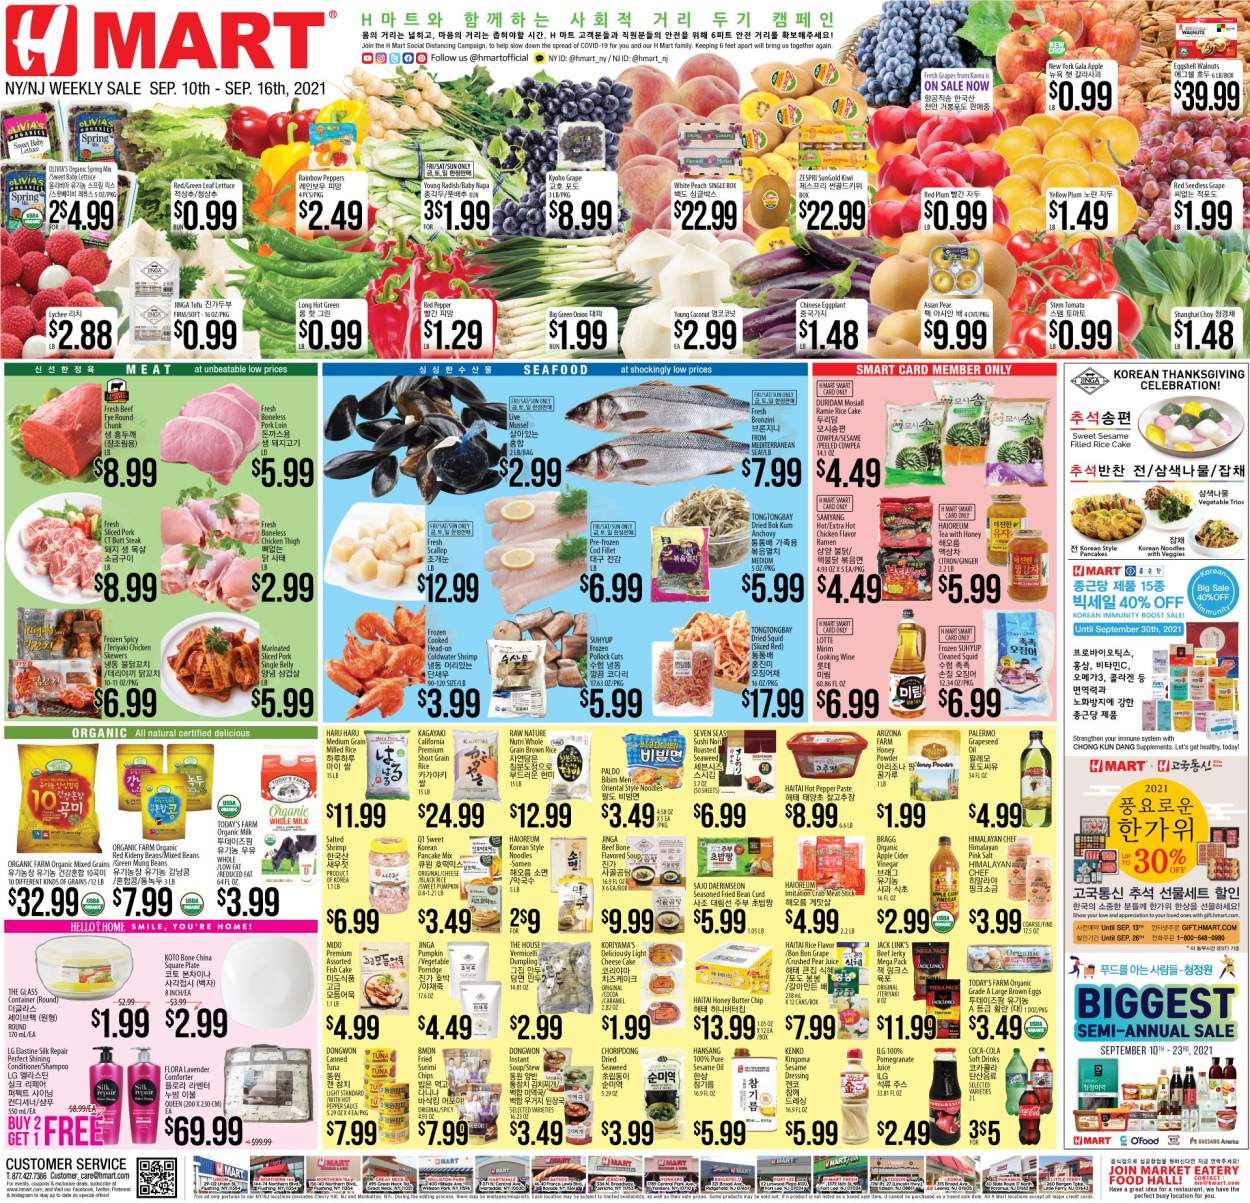 thumbnail - Hmart Flyer - 09/10/2021 - 09/16/2021 - Sales products - red plums, cheesecake, beans, ginger, radishes, pumpkin, lettuce, peppers, eggplant, Gala, kiwi, pears, cod, crab meat, mussels, scallops, squid, tuna, pollock, seafood, crab, fish, shrimps, ramen, condensed soup, soup, sauce, pancakes, dumplings, noodles, instant soup, beef jerky, jerky, curd, tofu, organic milk, Silk, eggs, butter, Flora, sesame dressing, fish cake, Celebration, Jack Link's, seaweed, anchovies, canned tuna, lychee, porridge, brown rice, rice, short grain rice, caramel, dressing, apple cider vinegar, sesame oil, oil, grape seed oil, walnuts, Coca-Cola, juice, soft drink, AriZona, Boost, tea, cooking wine, beef meat, steak, eye of round, pork loin, pork meat, shampoo, conditioner, plate, pomegranate. Page 1.